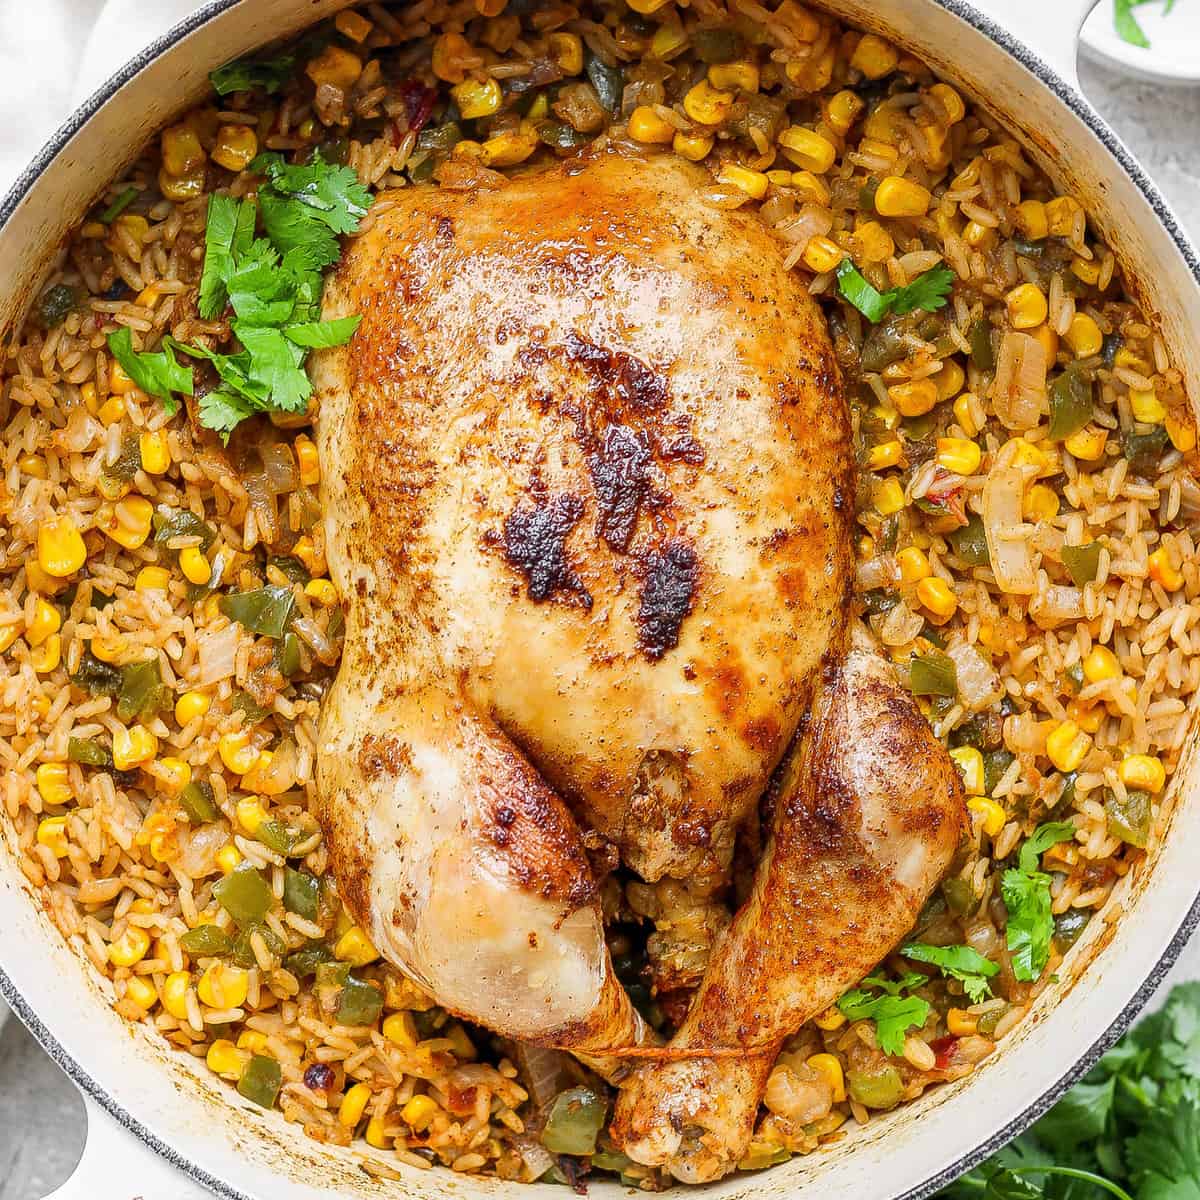 https://fitfoodiefinds.com/wp-content/uploads/2023/06/Spanish-Chicken-and-Rice-11.jpg